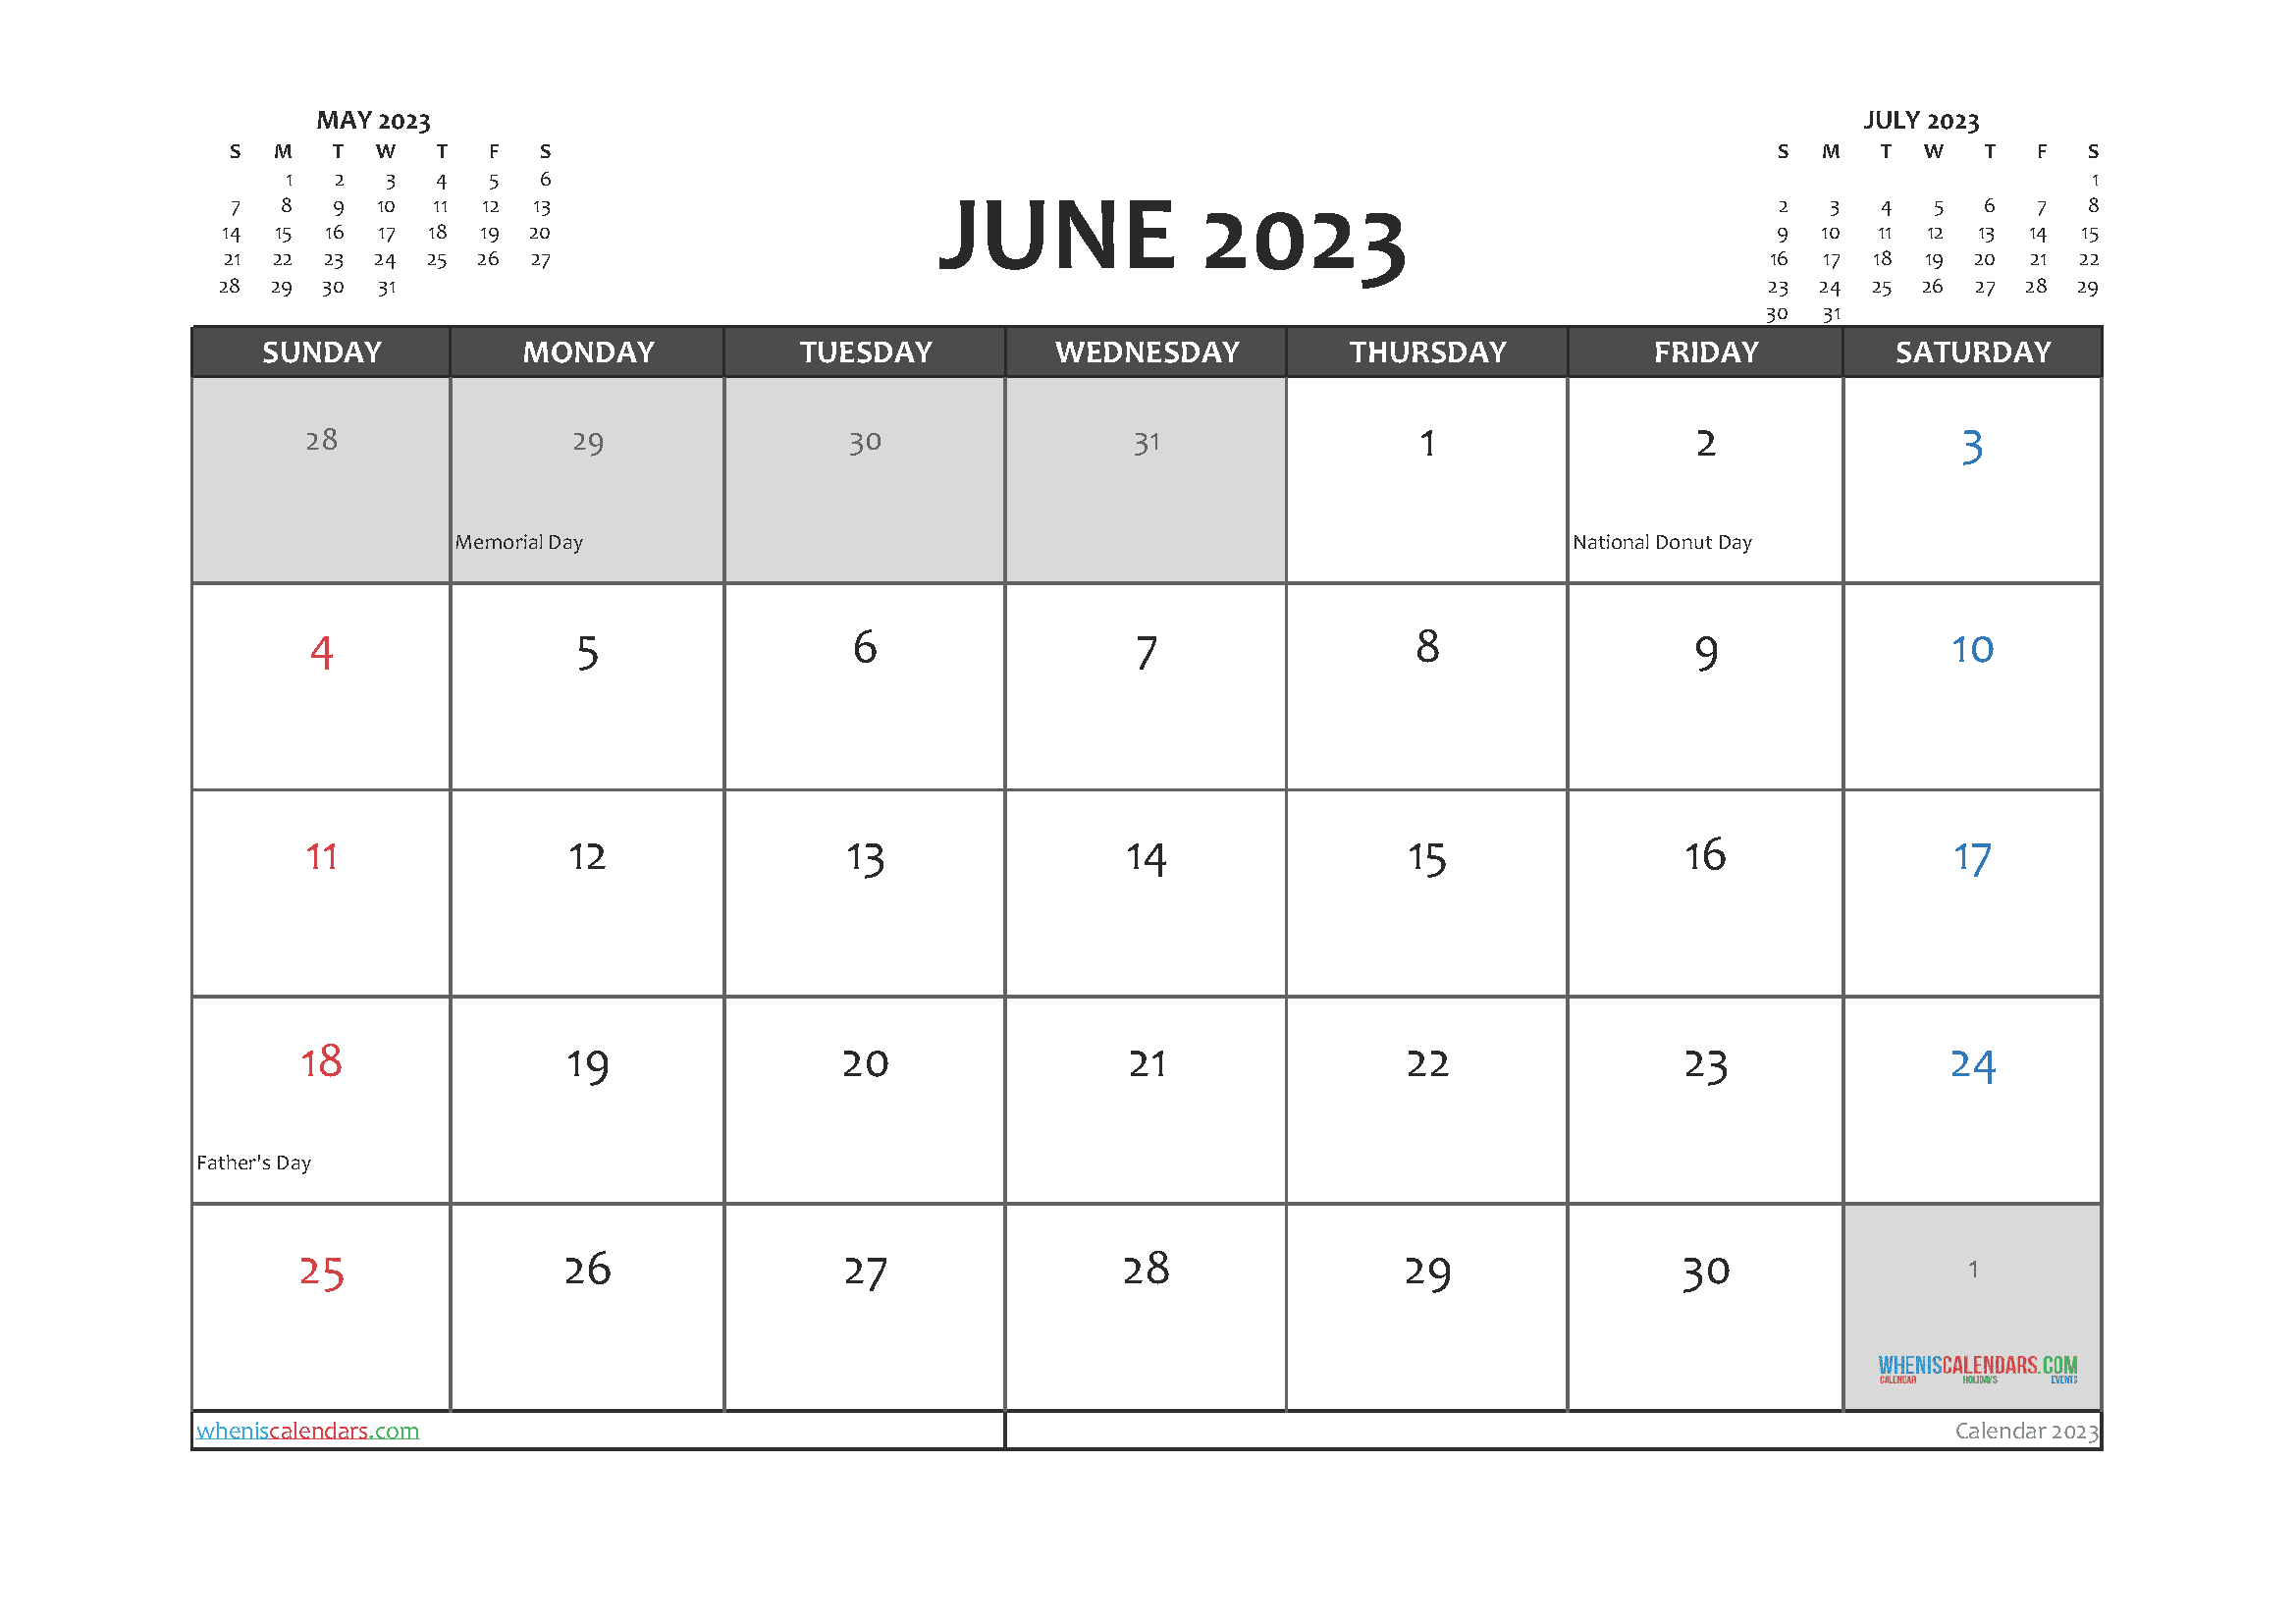 June 2023 Calendar with Holidays Free Printable PDF in Landscape